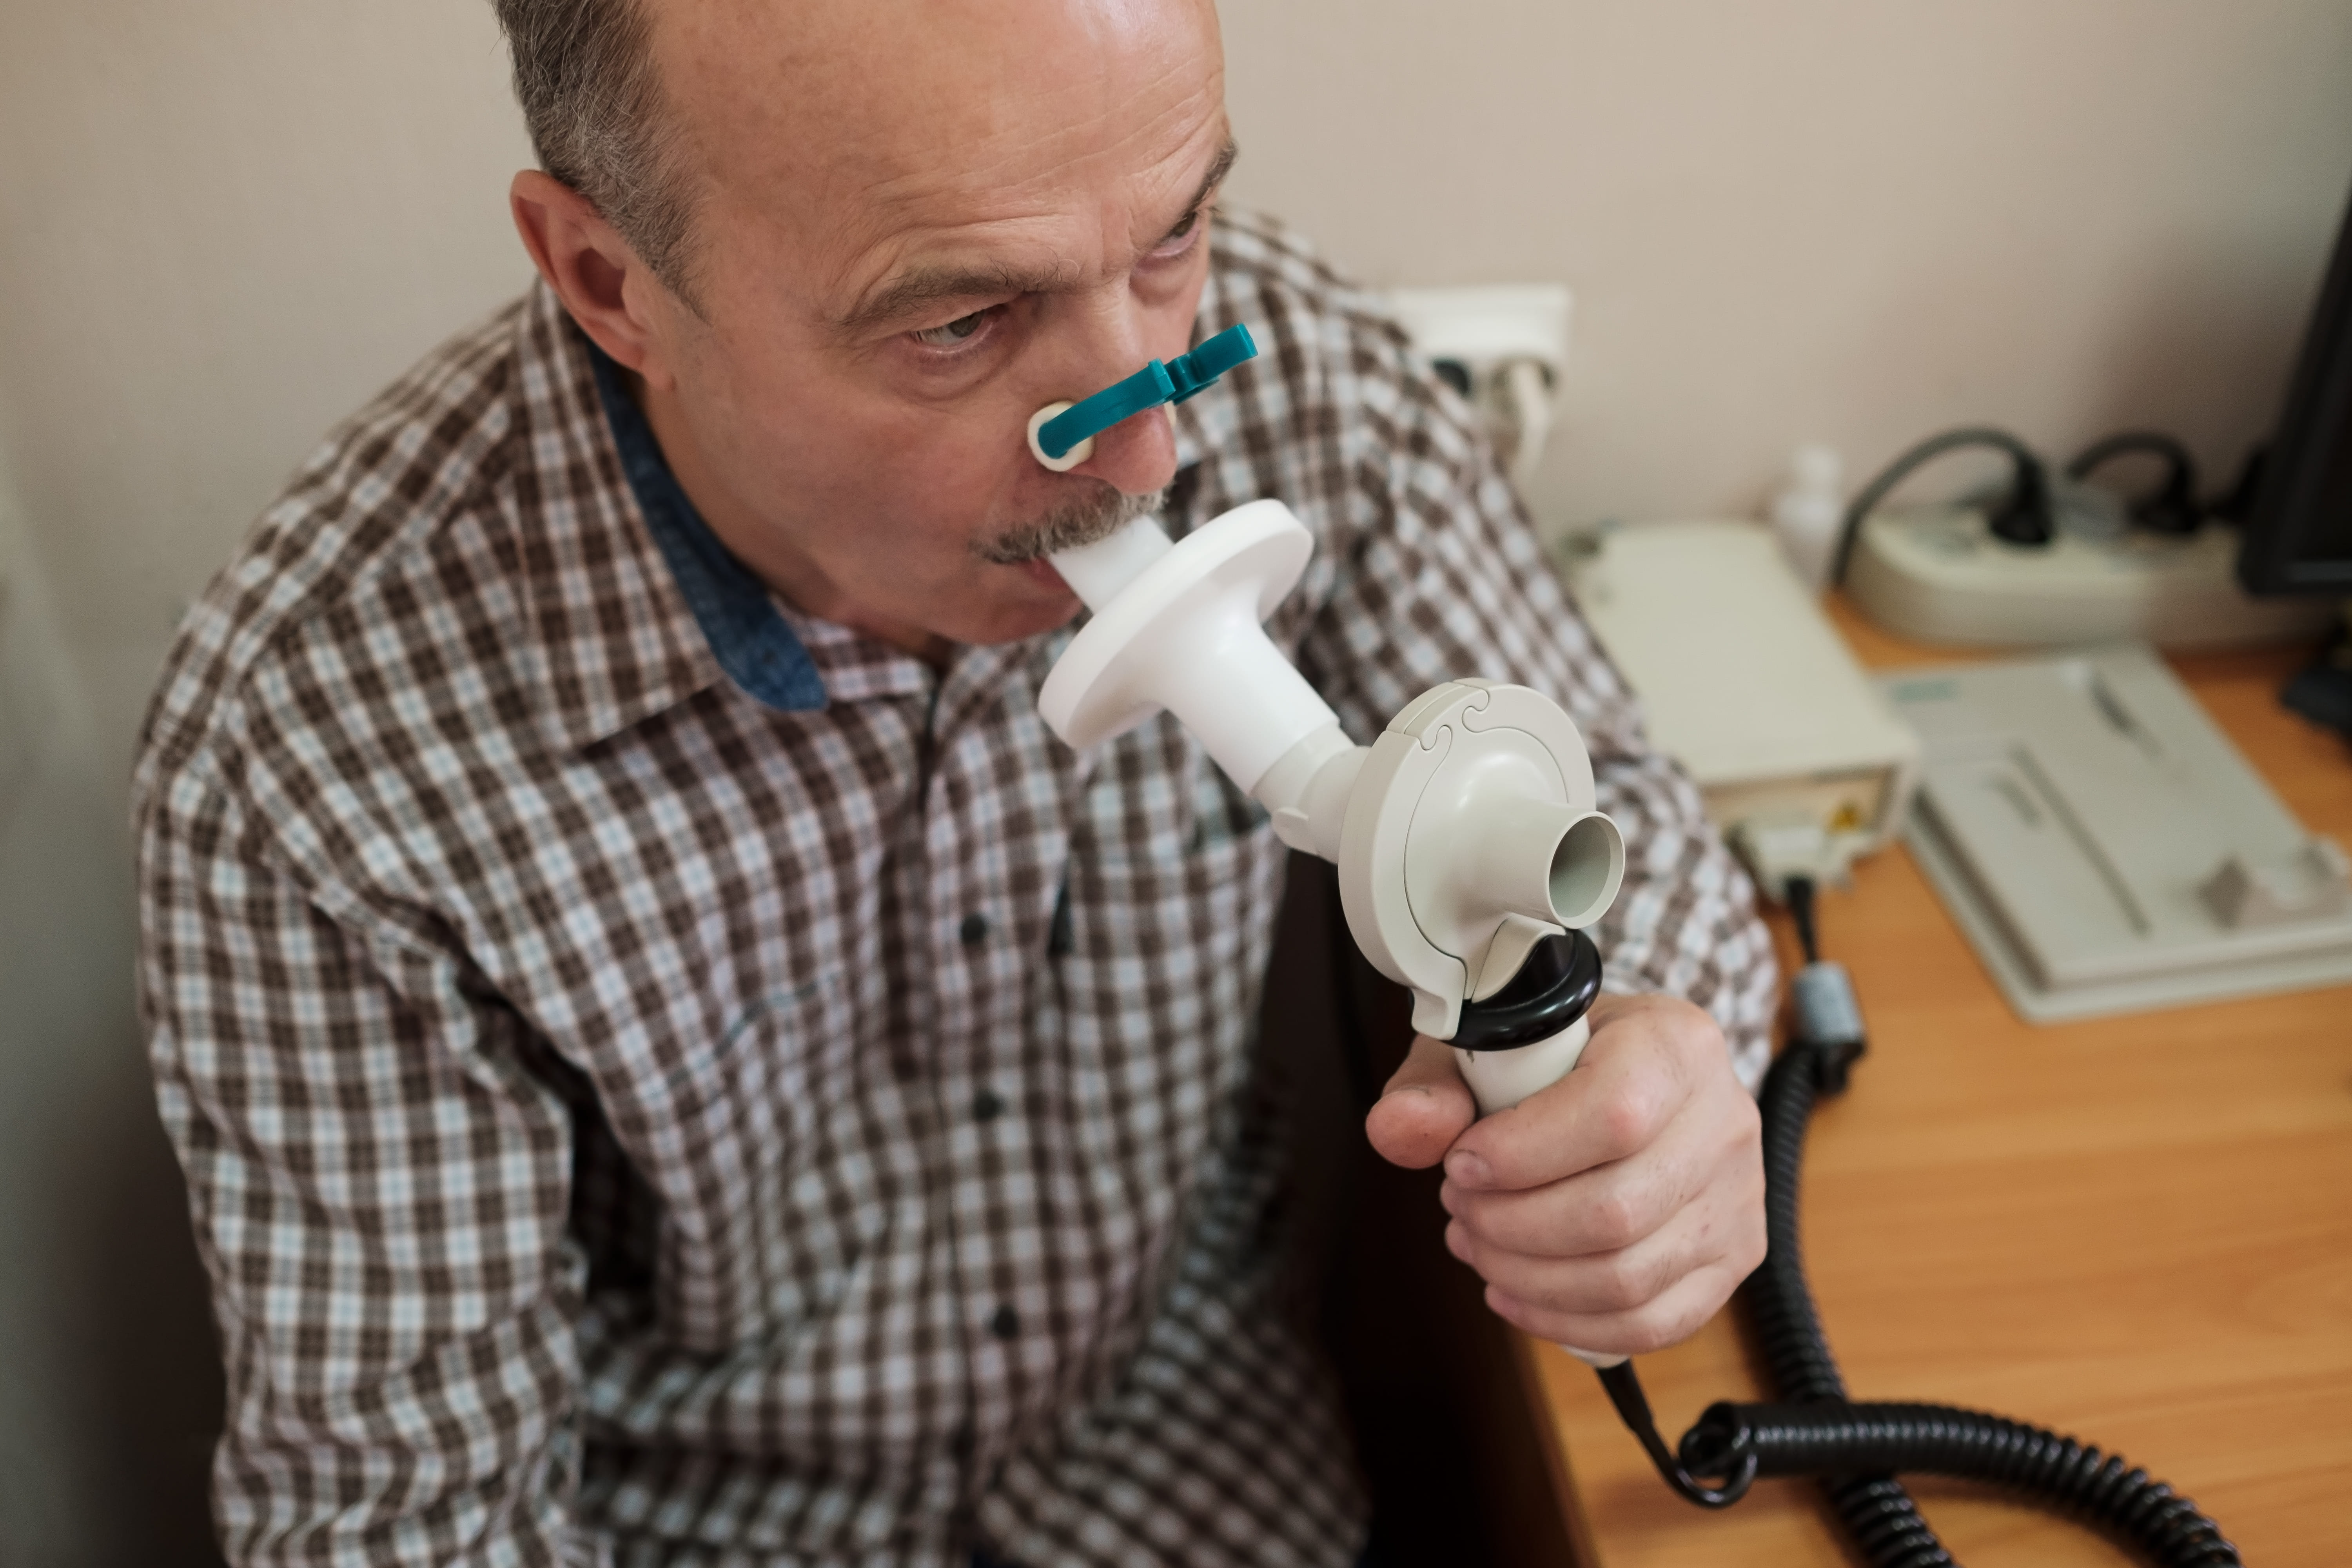 Man blowing into a spirometry device.